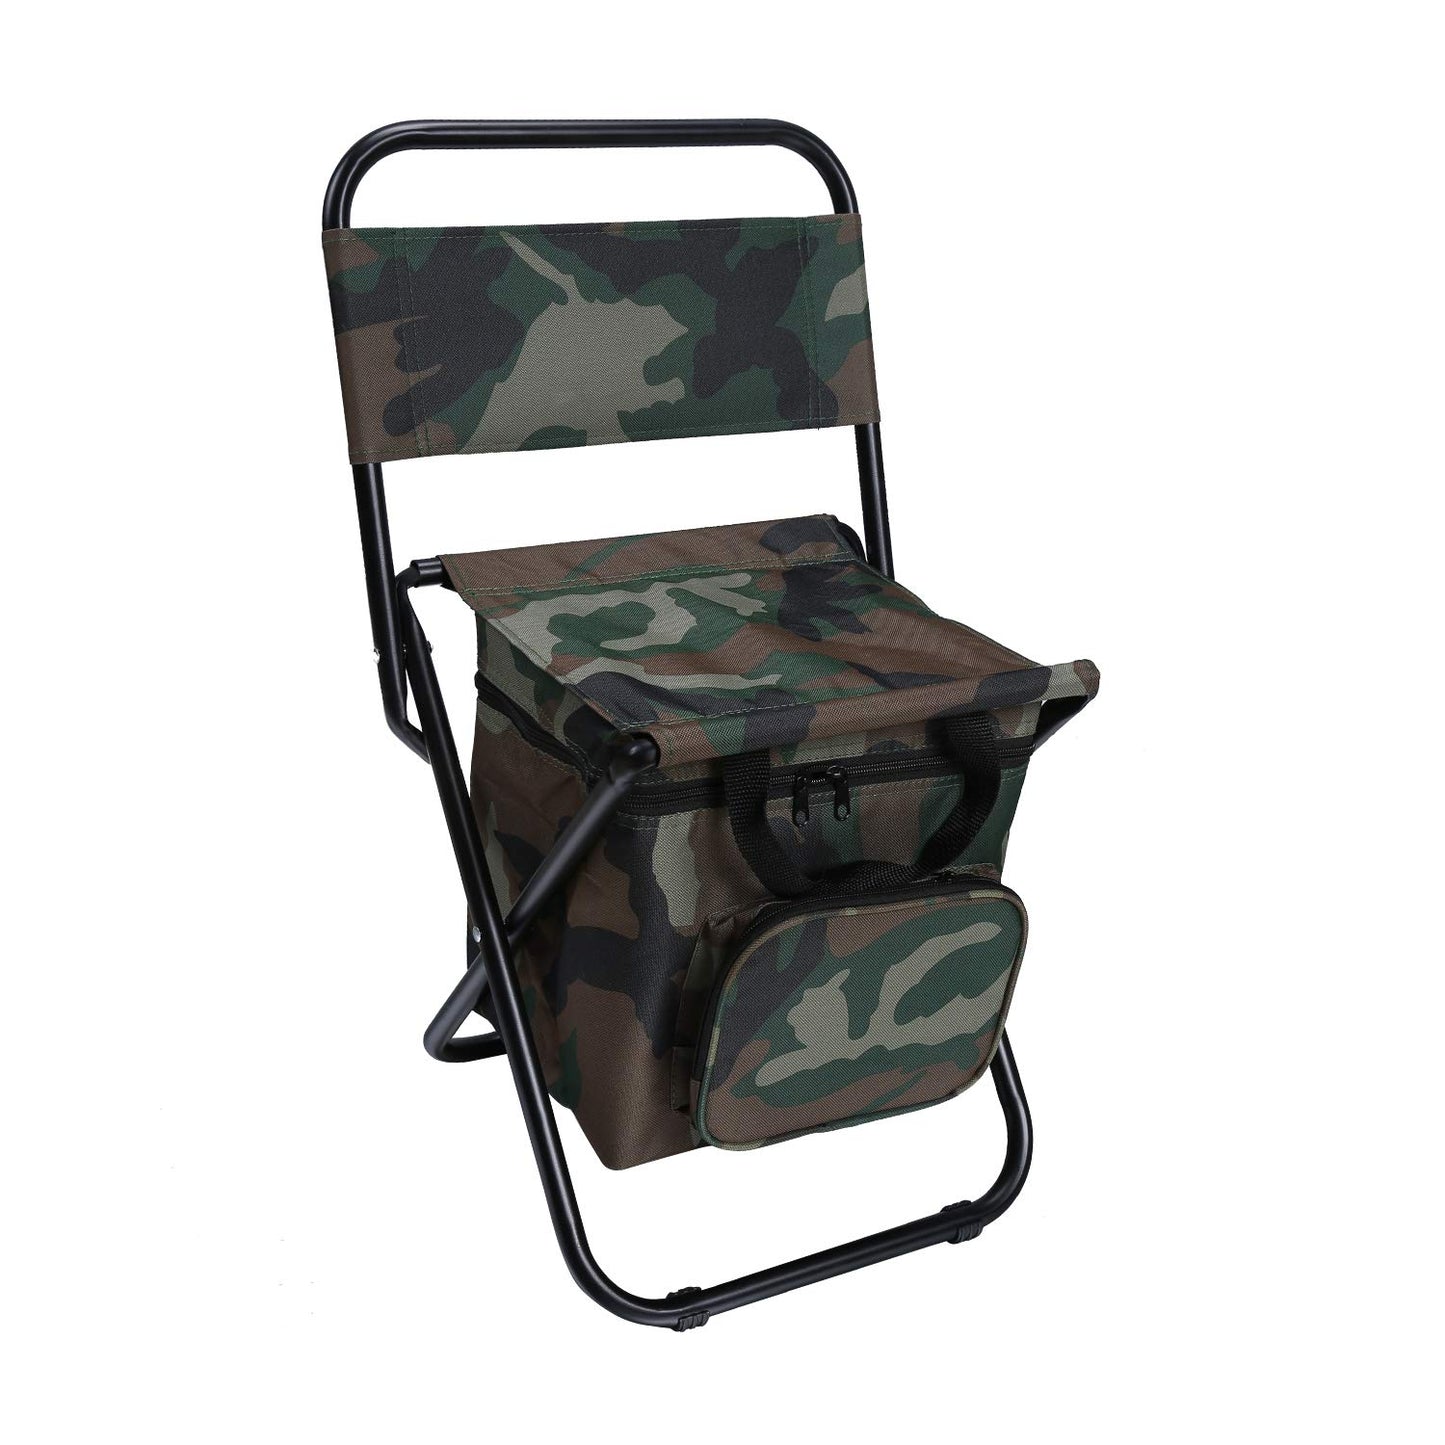 LEADALLWAY Fishing Chair with Cooler Bag Compact Fishing Stool Foldable Camping Chair